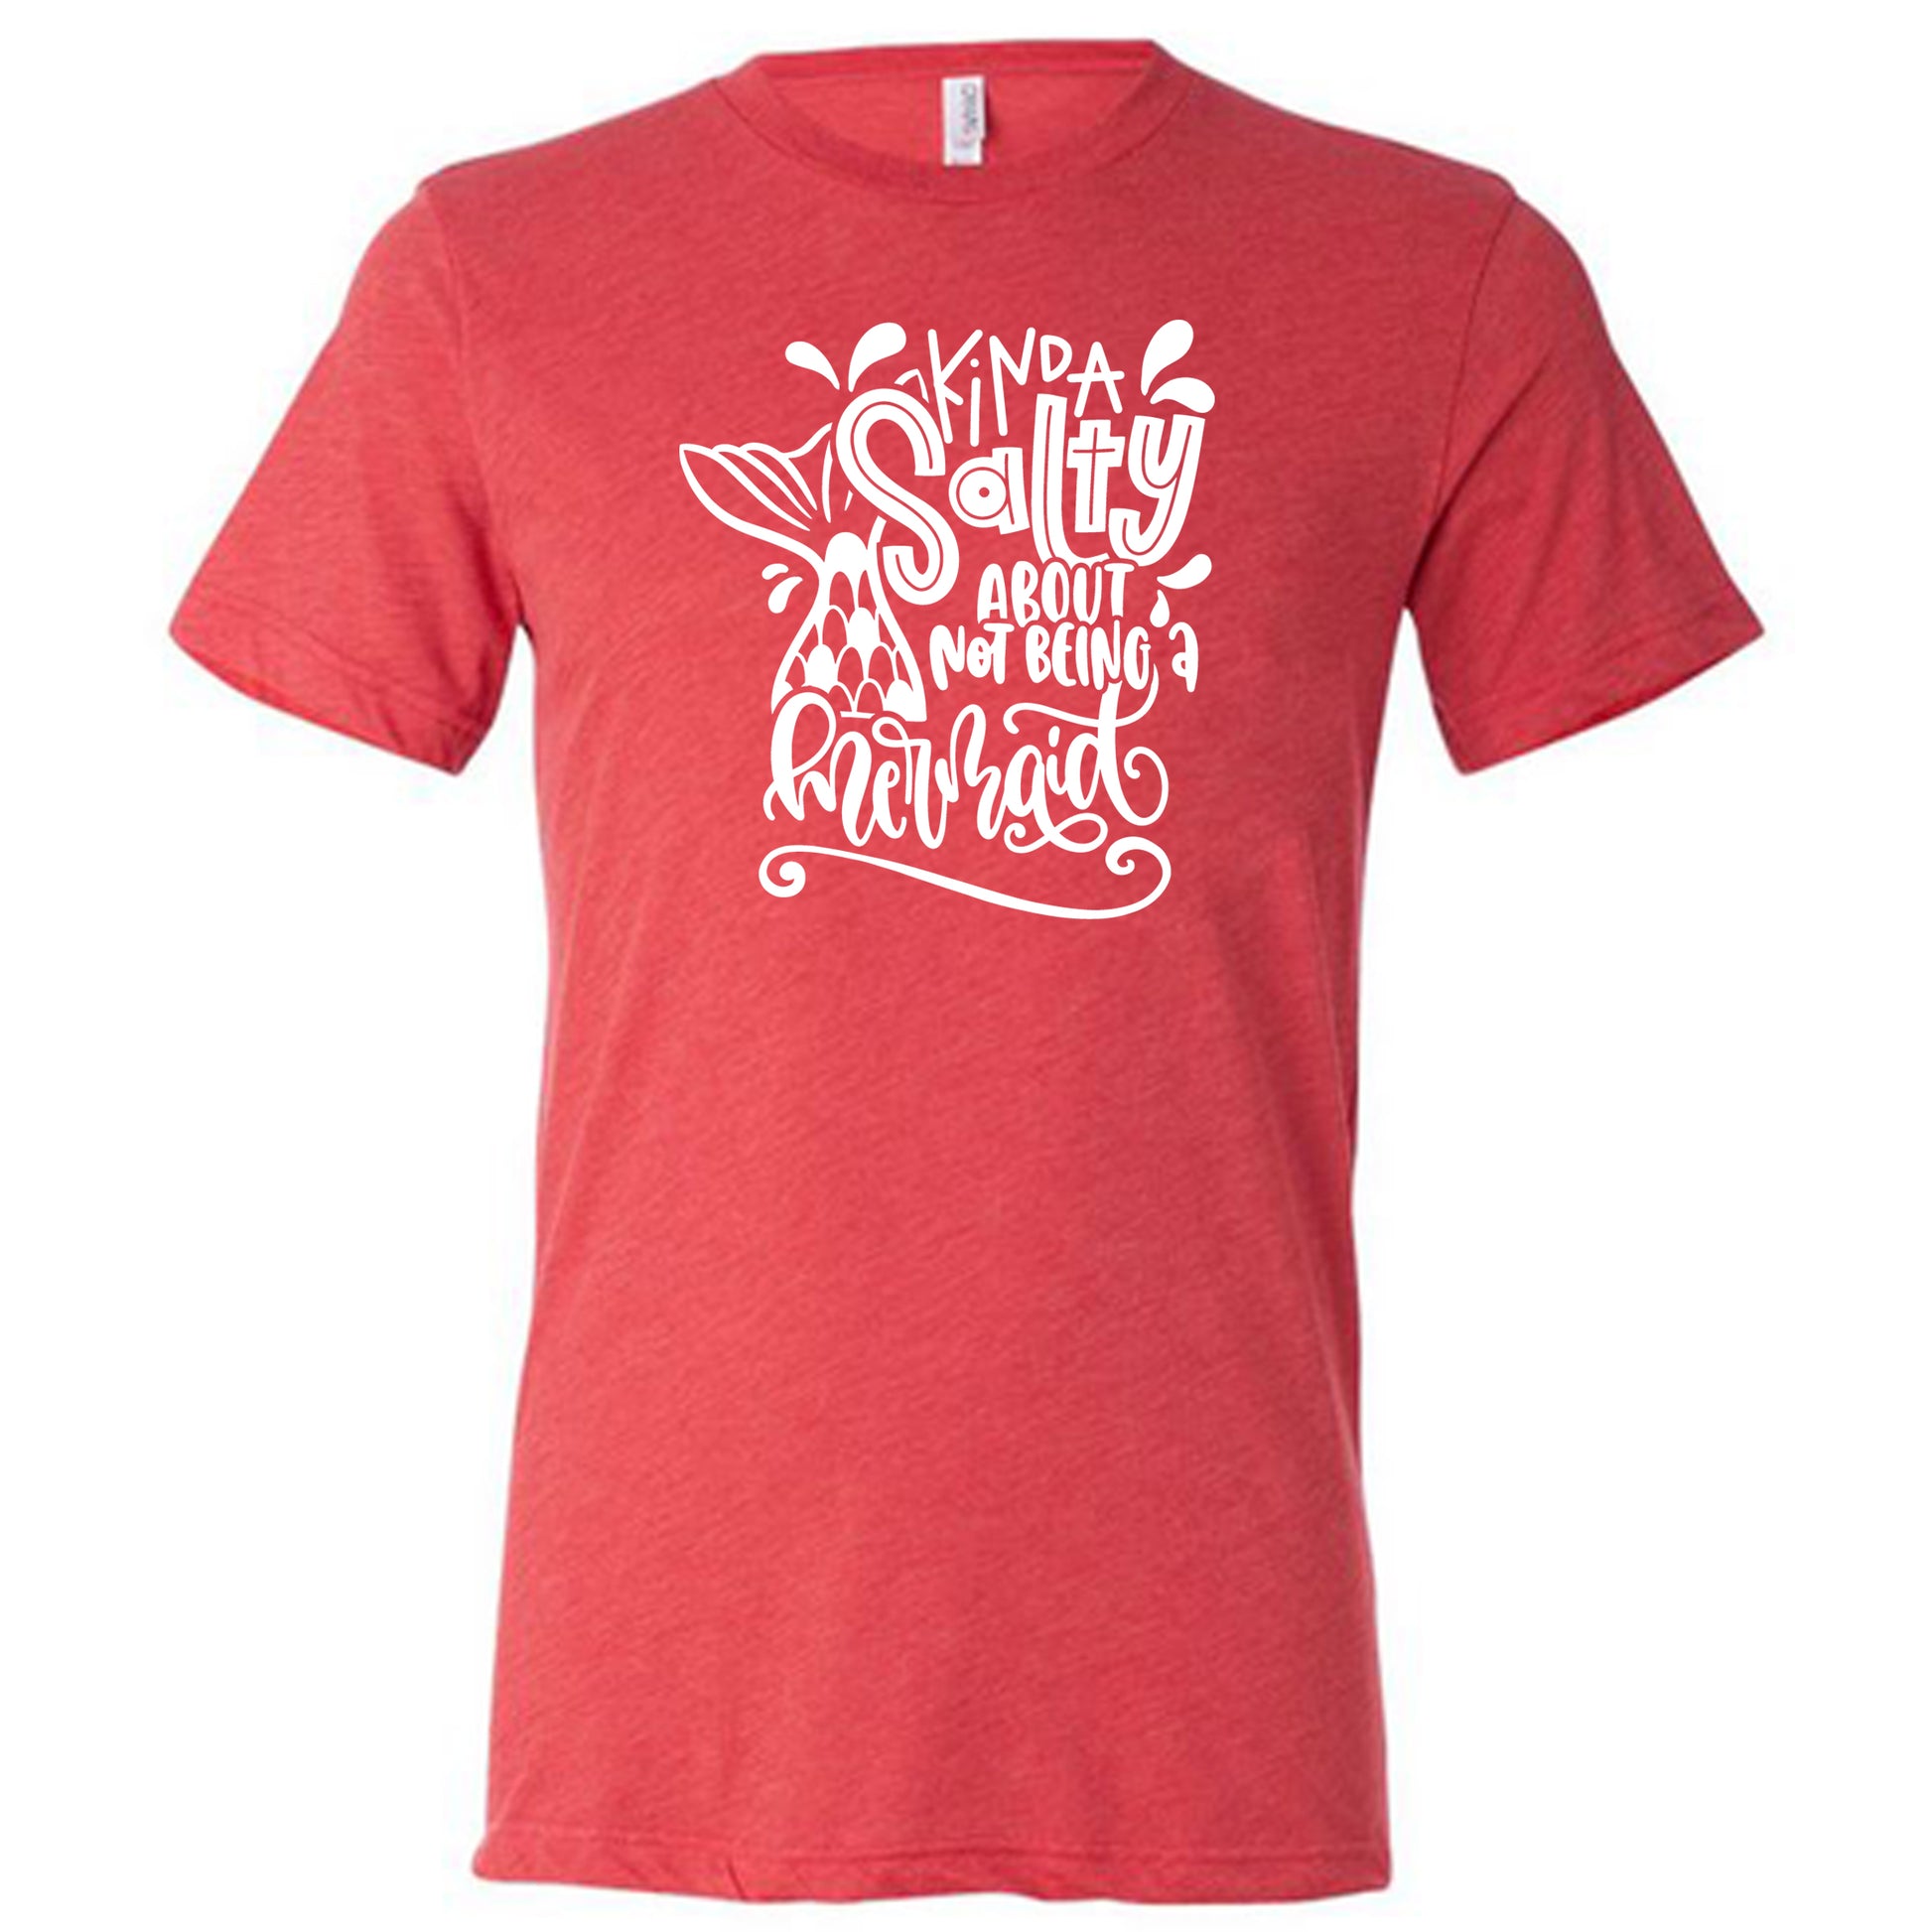 red unisex tee with the saying "kinda salty about not being a mermaid" in the center